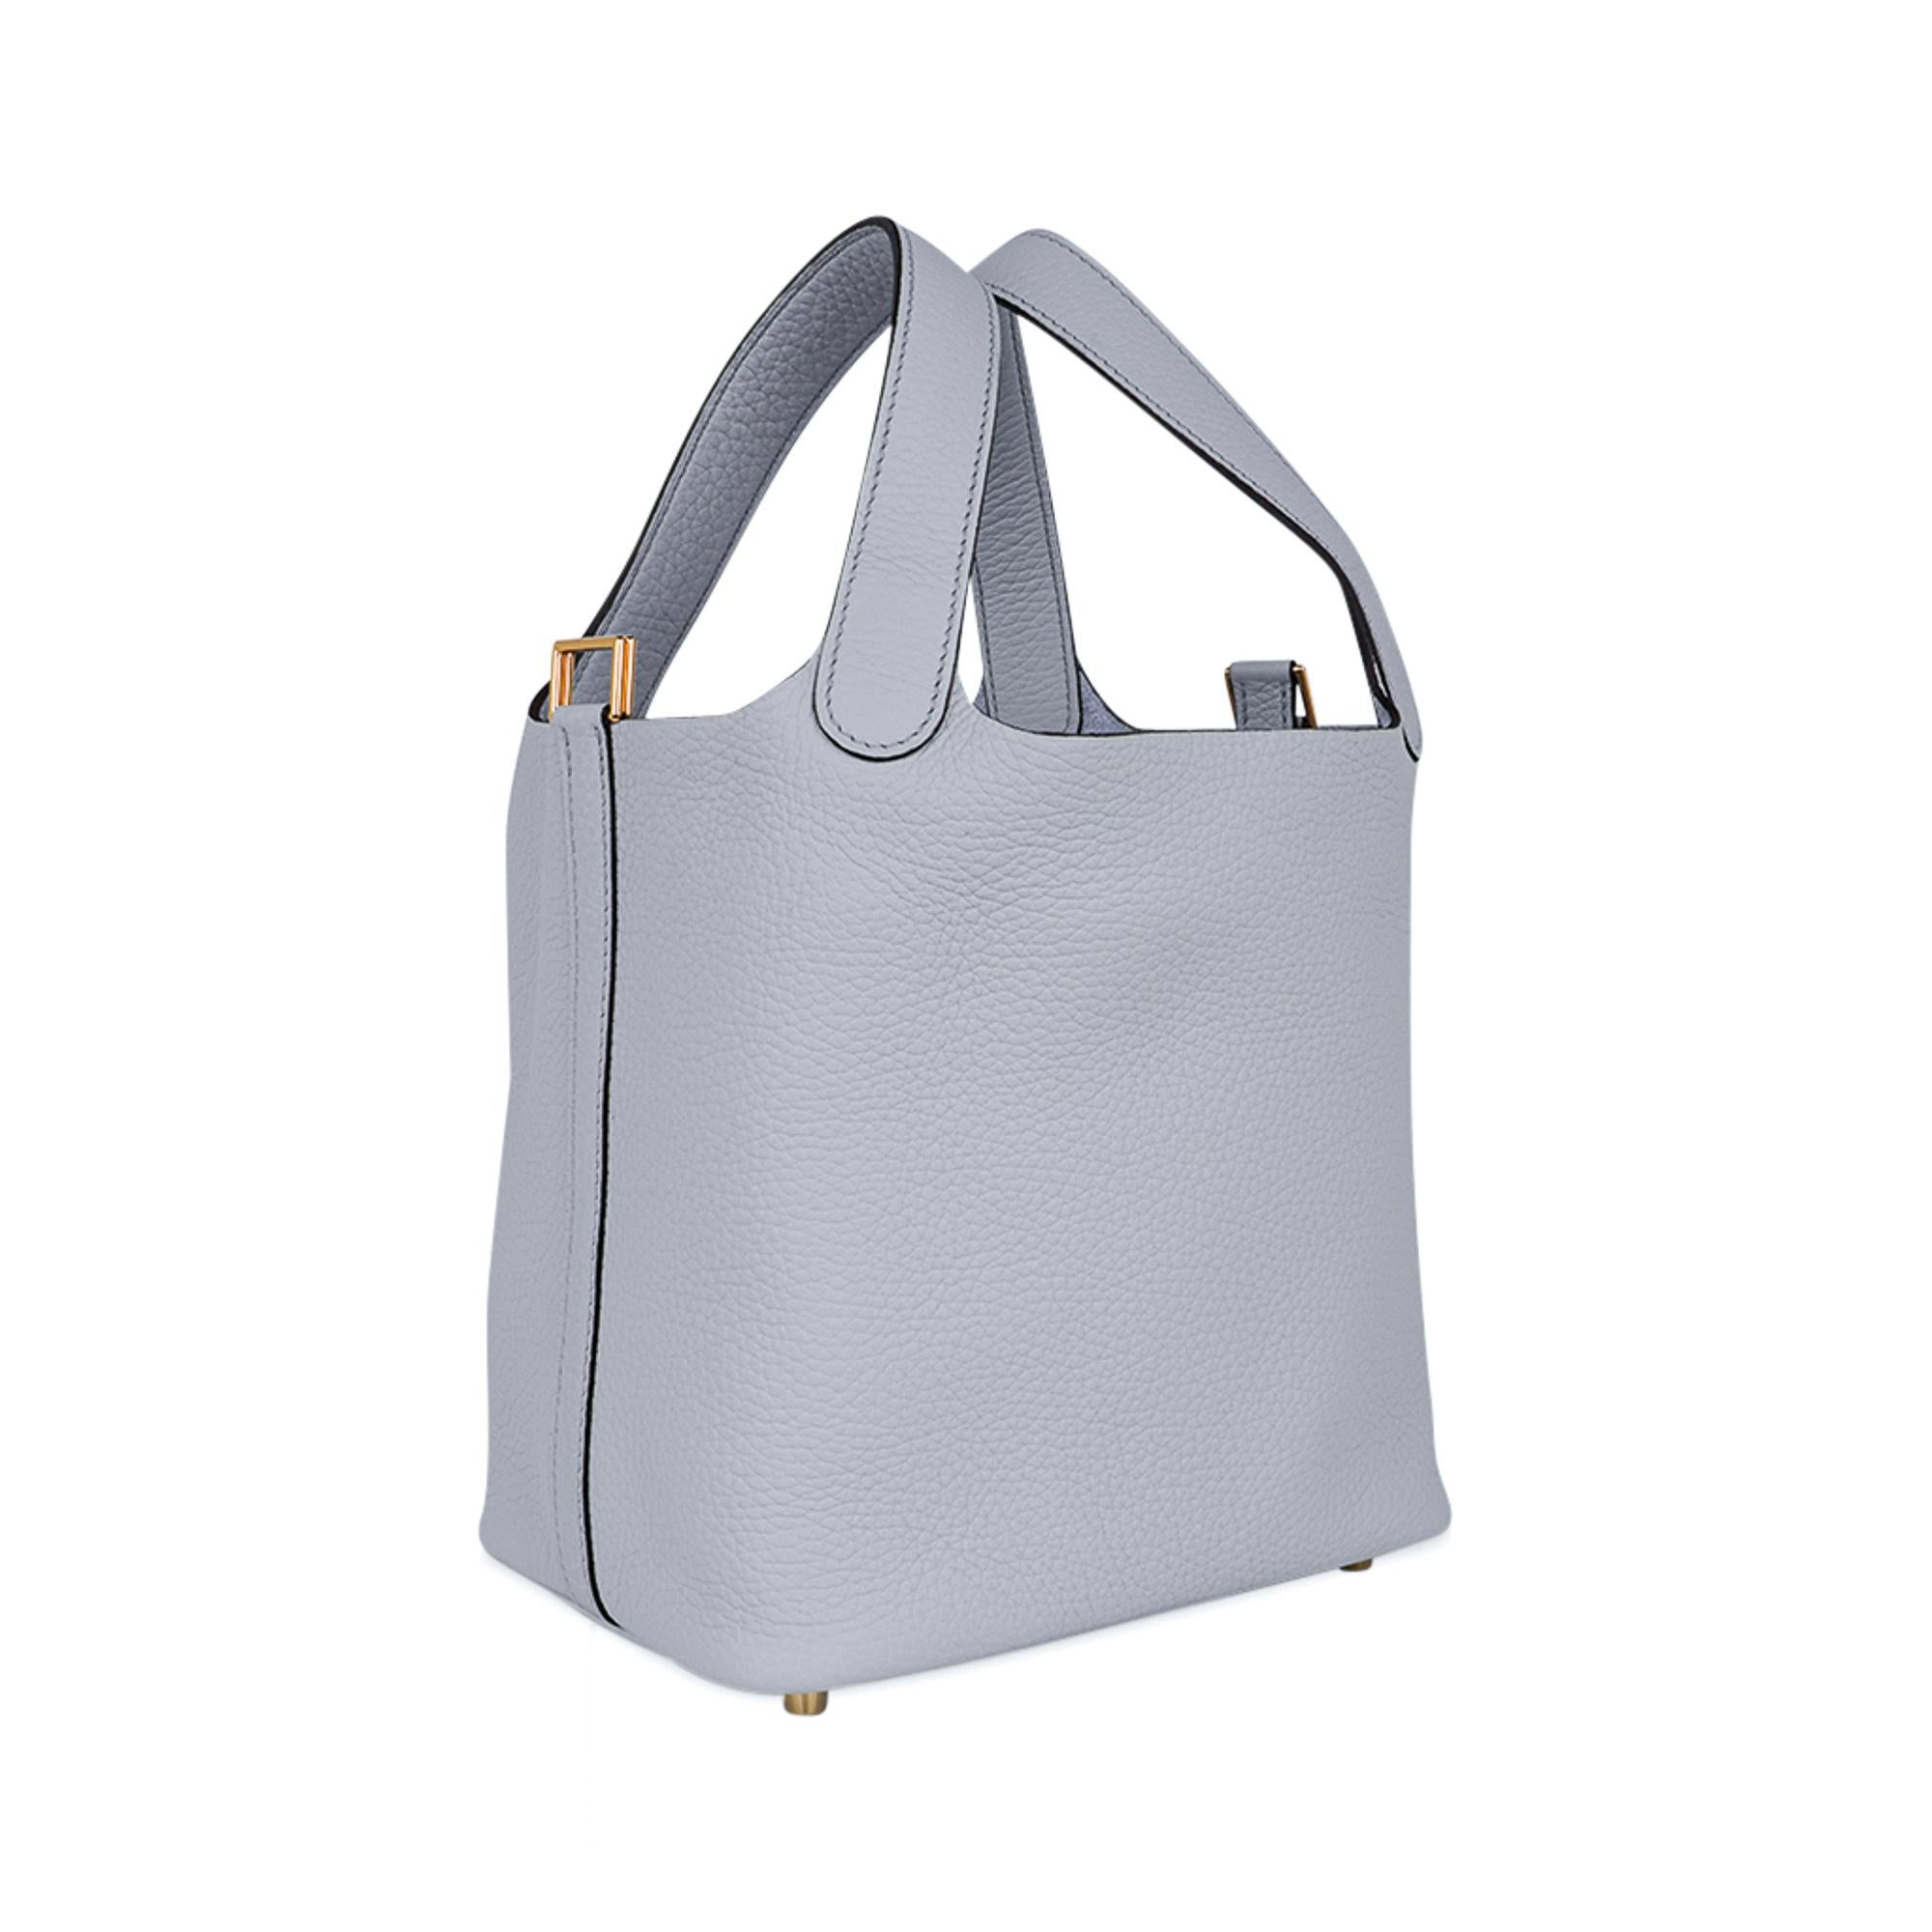 MIghtychic offers an Hermes Picotin Lock 18 tote bag featured in Blue Pale.
Clemence leather with gold hardware.
This roomy small tote is a perfect go to bag! 
Comes with lock and keys, sleeper, and signature Hermes box.
NEW or NEVER WORN.
final